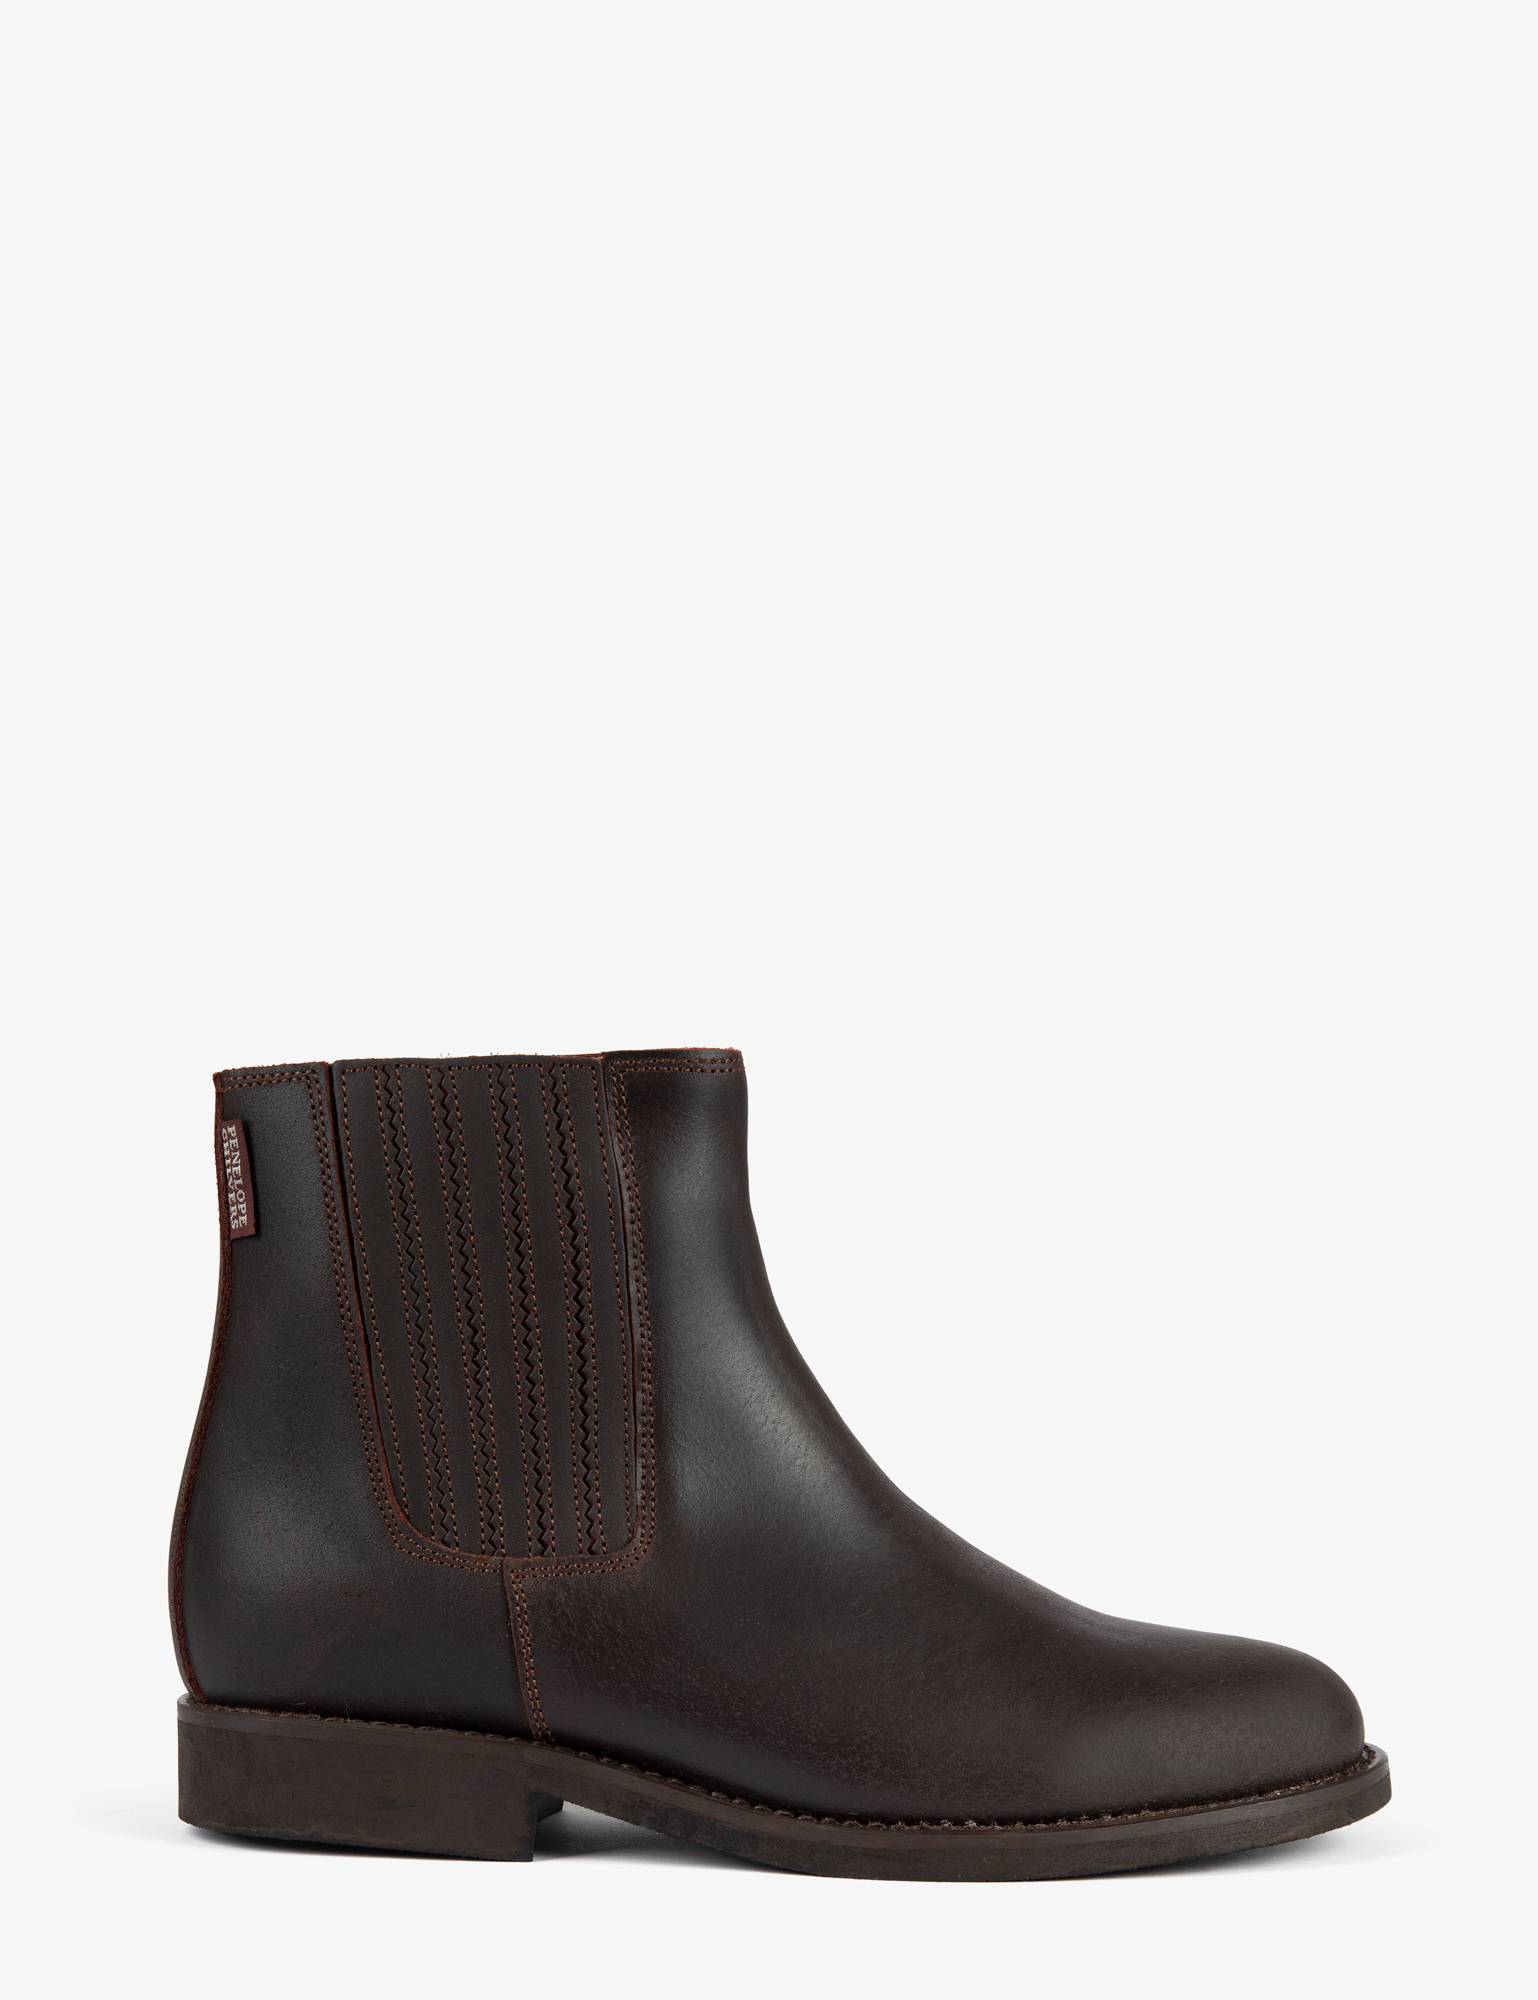 Penelope Chilvers Coming Soon - Chelsea Leather Boot